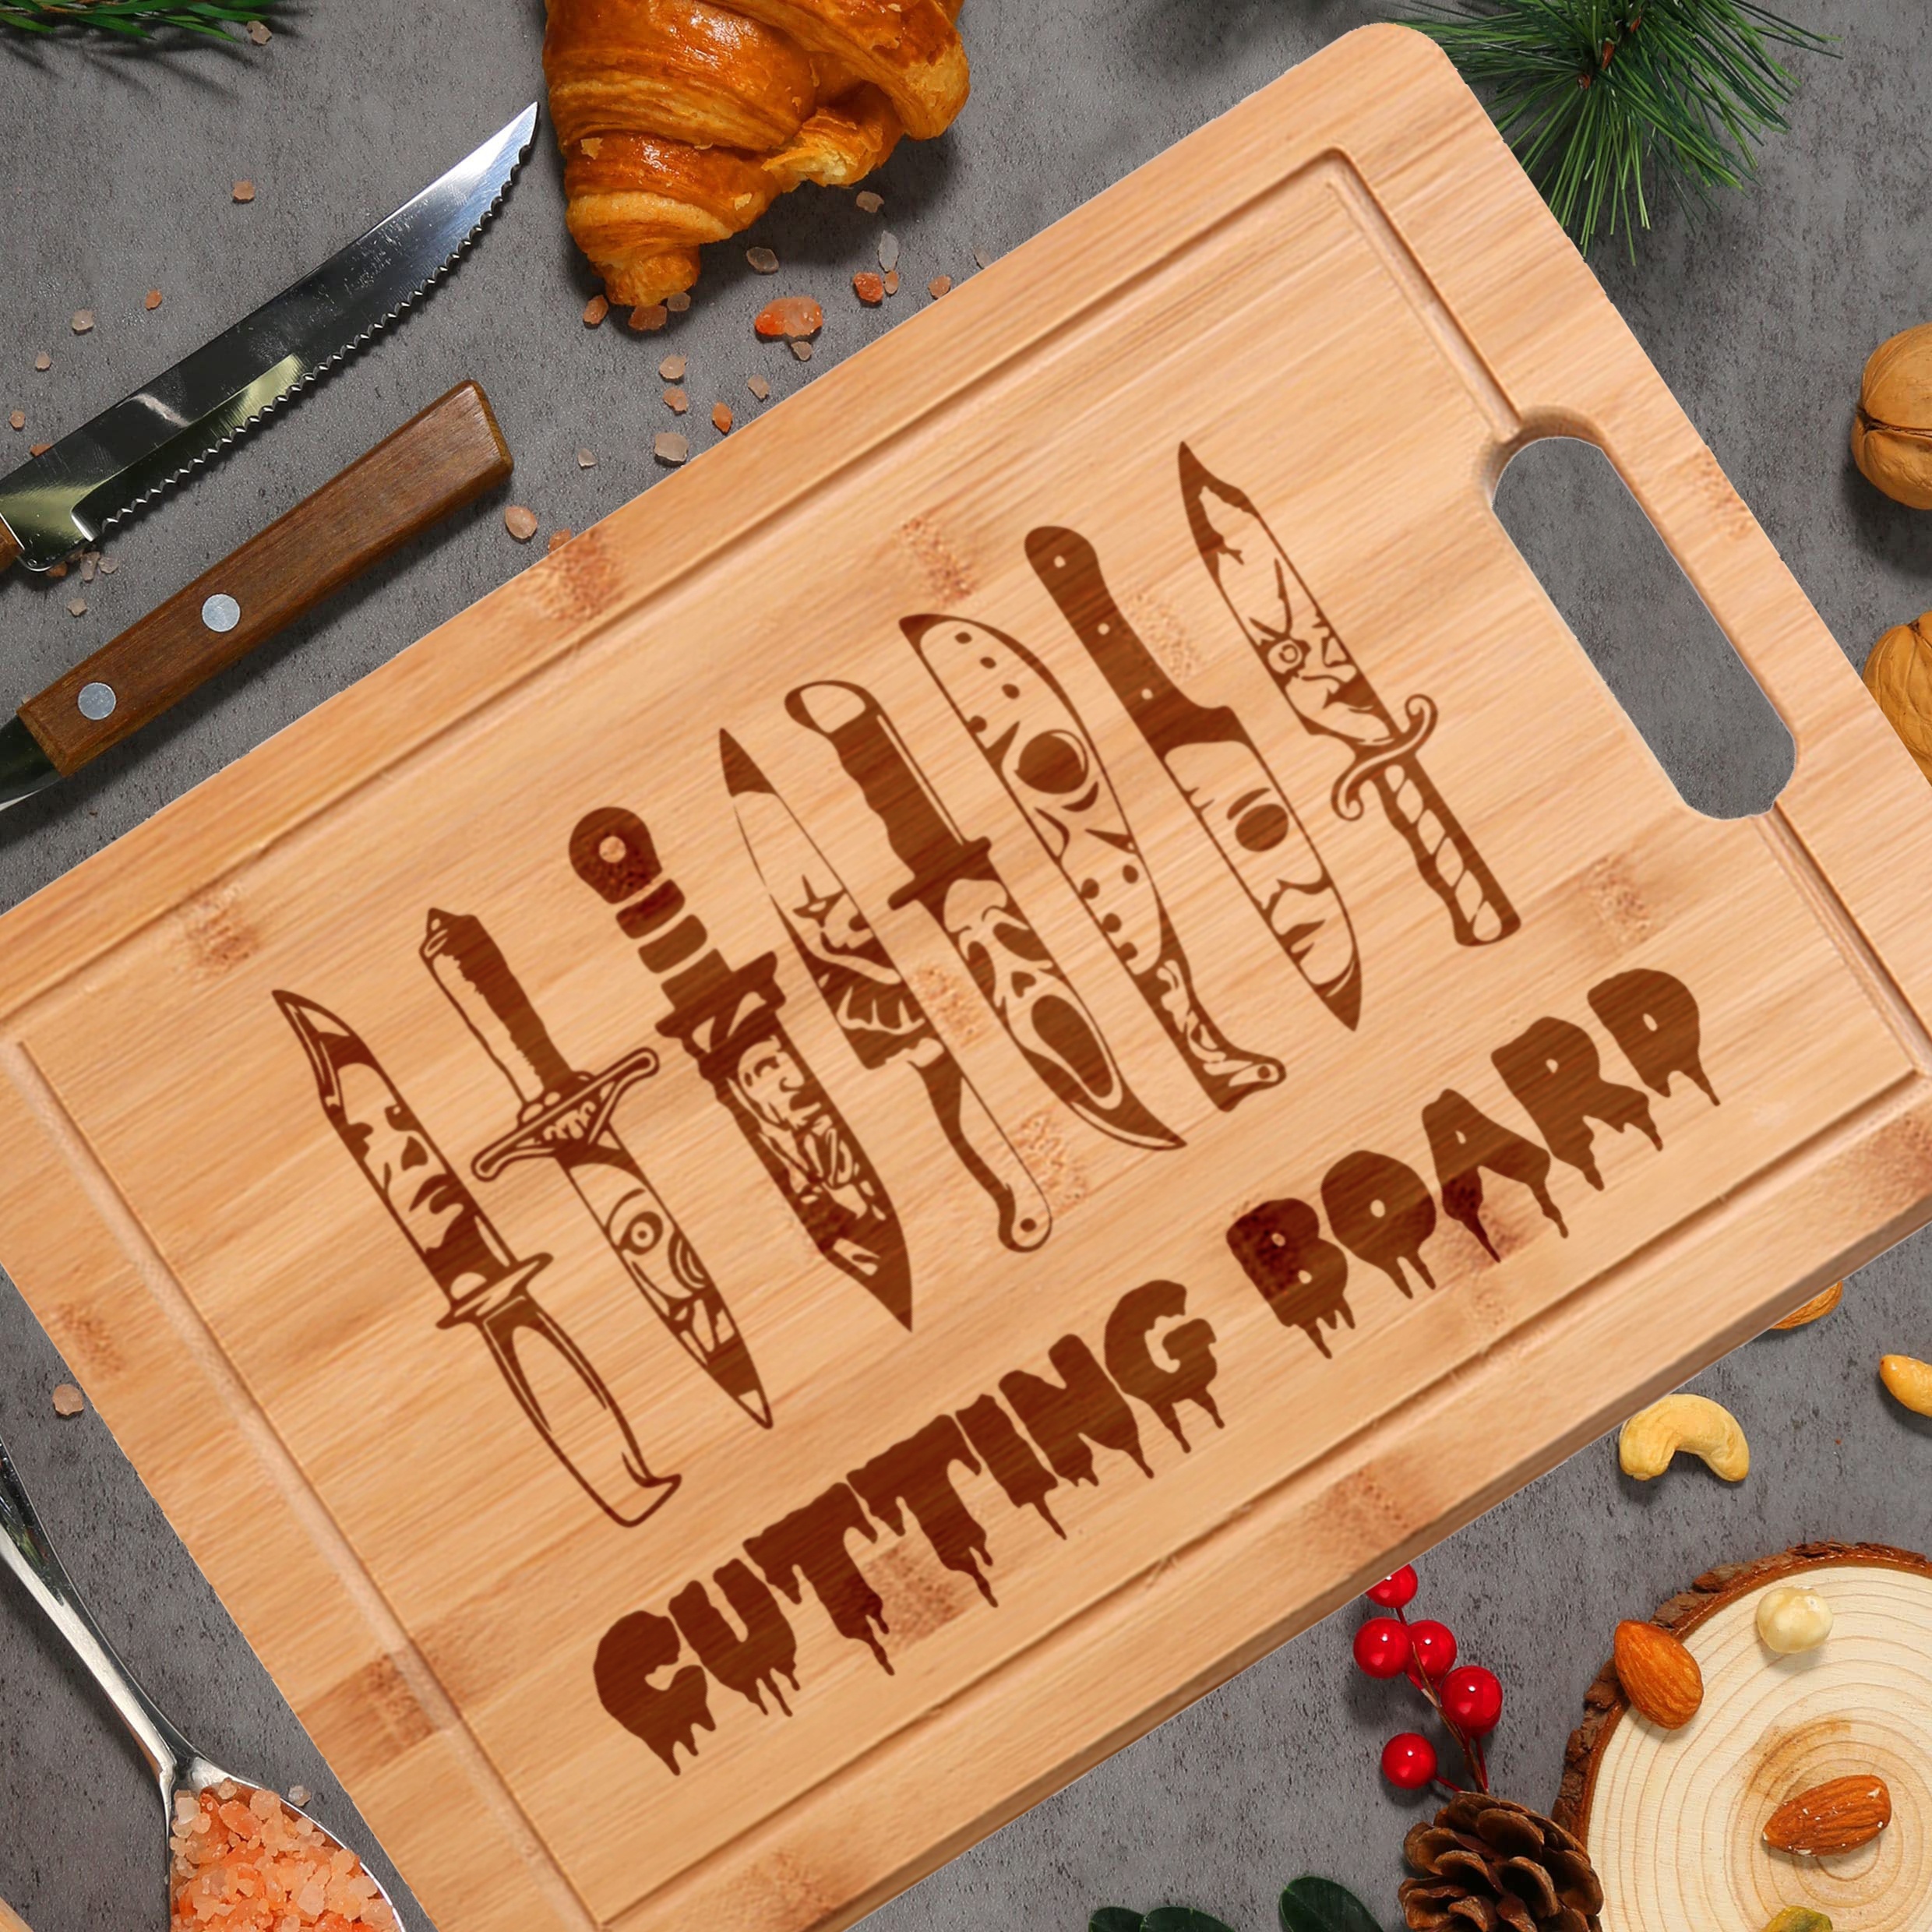 Funny Kitchen Cutting Board - Bout to Starve - Gift for Cook